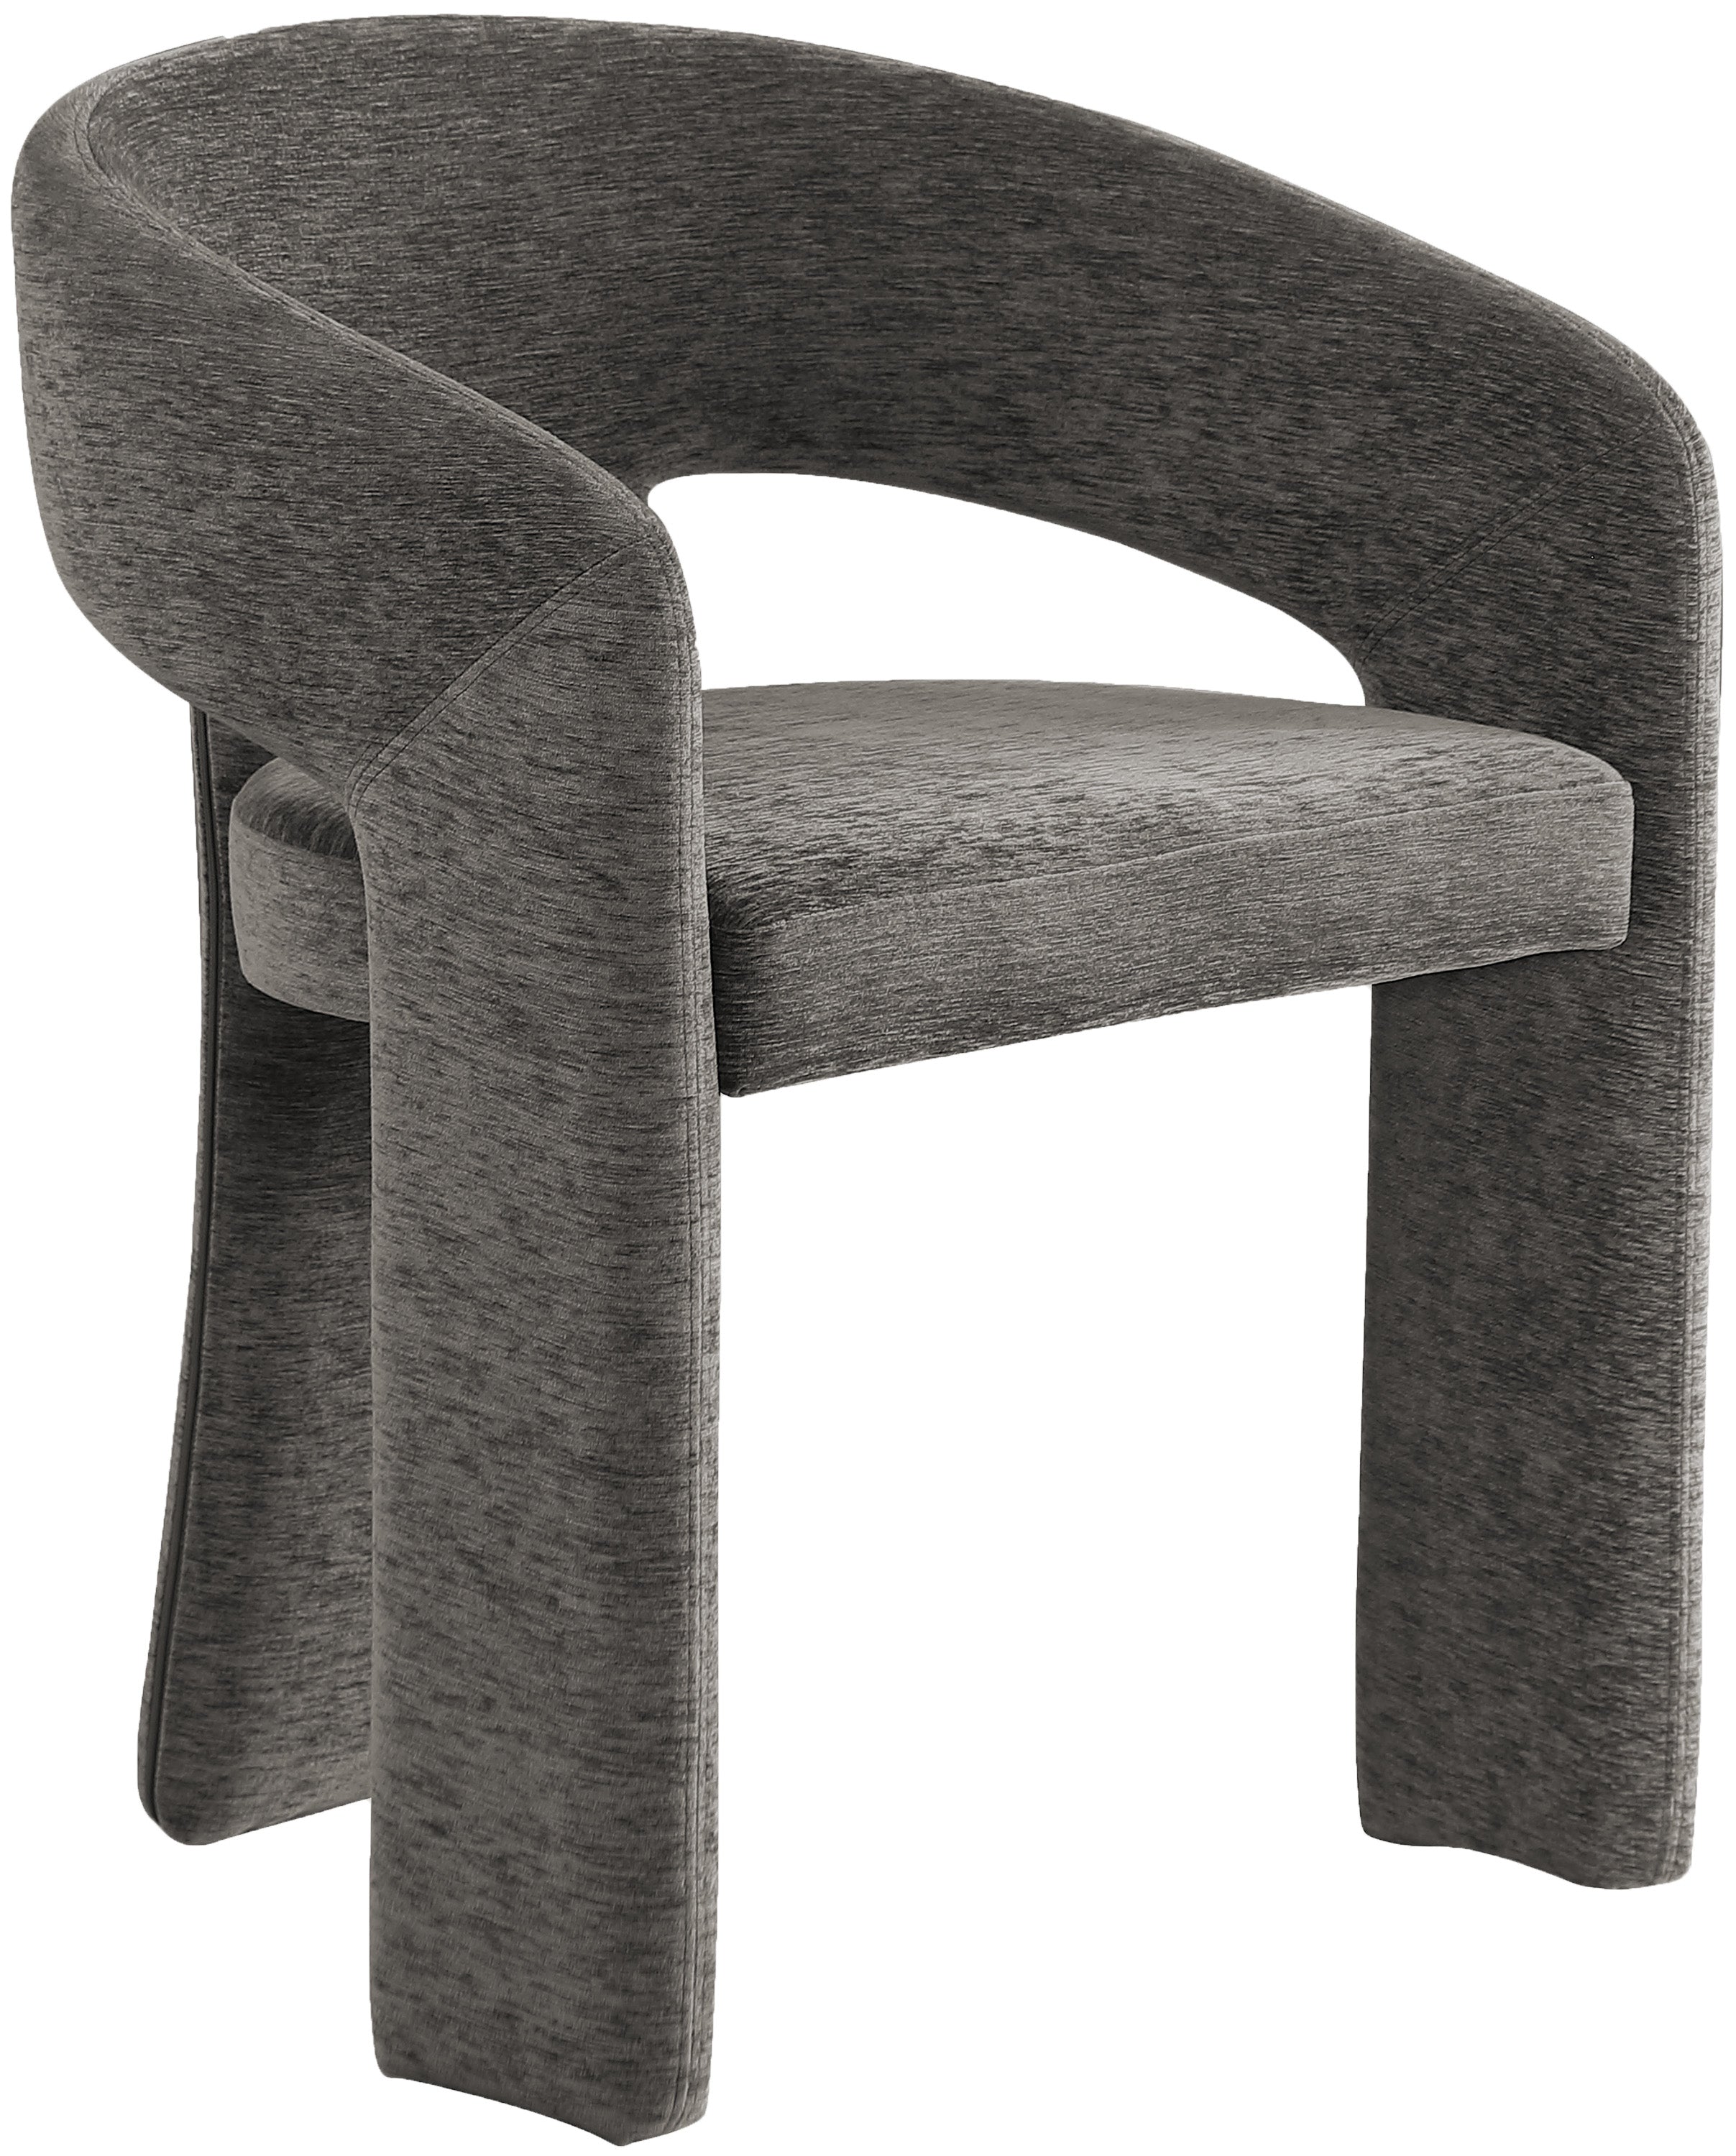 Rendition Fabric Dining Chair- Grey